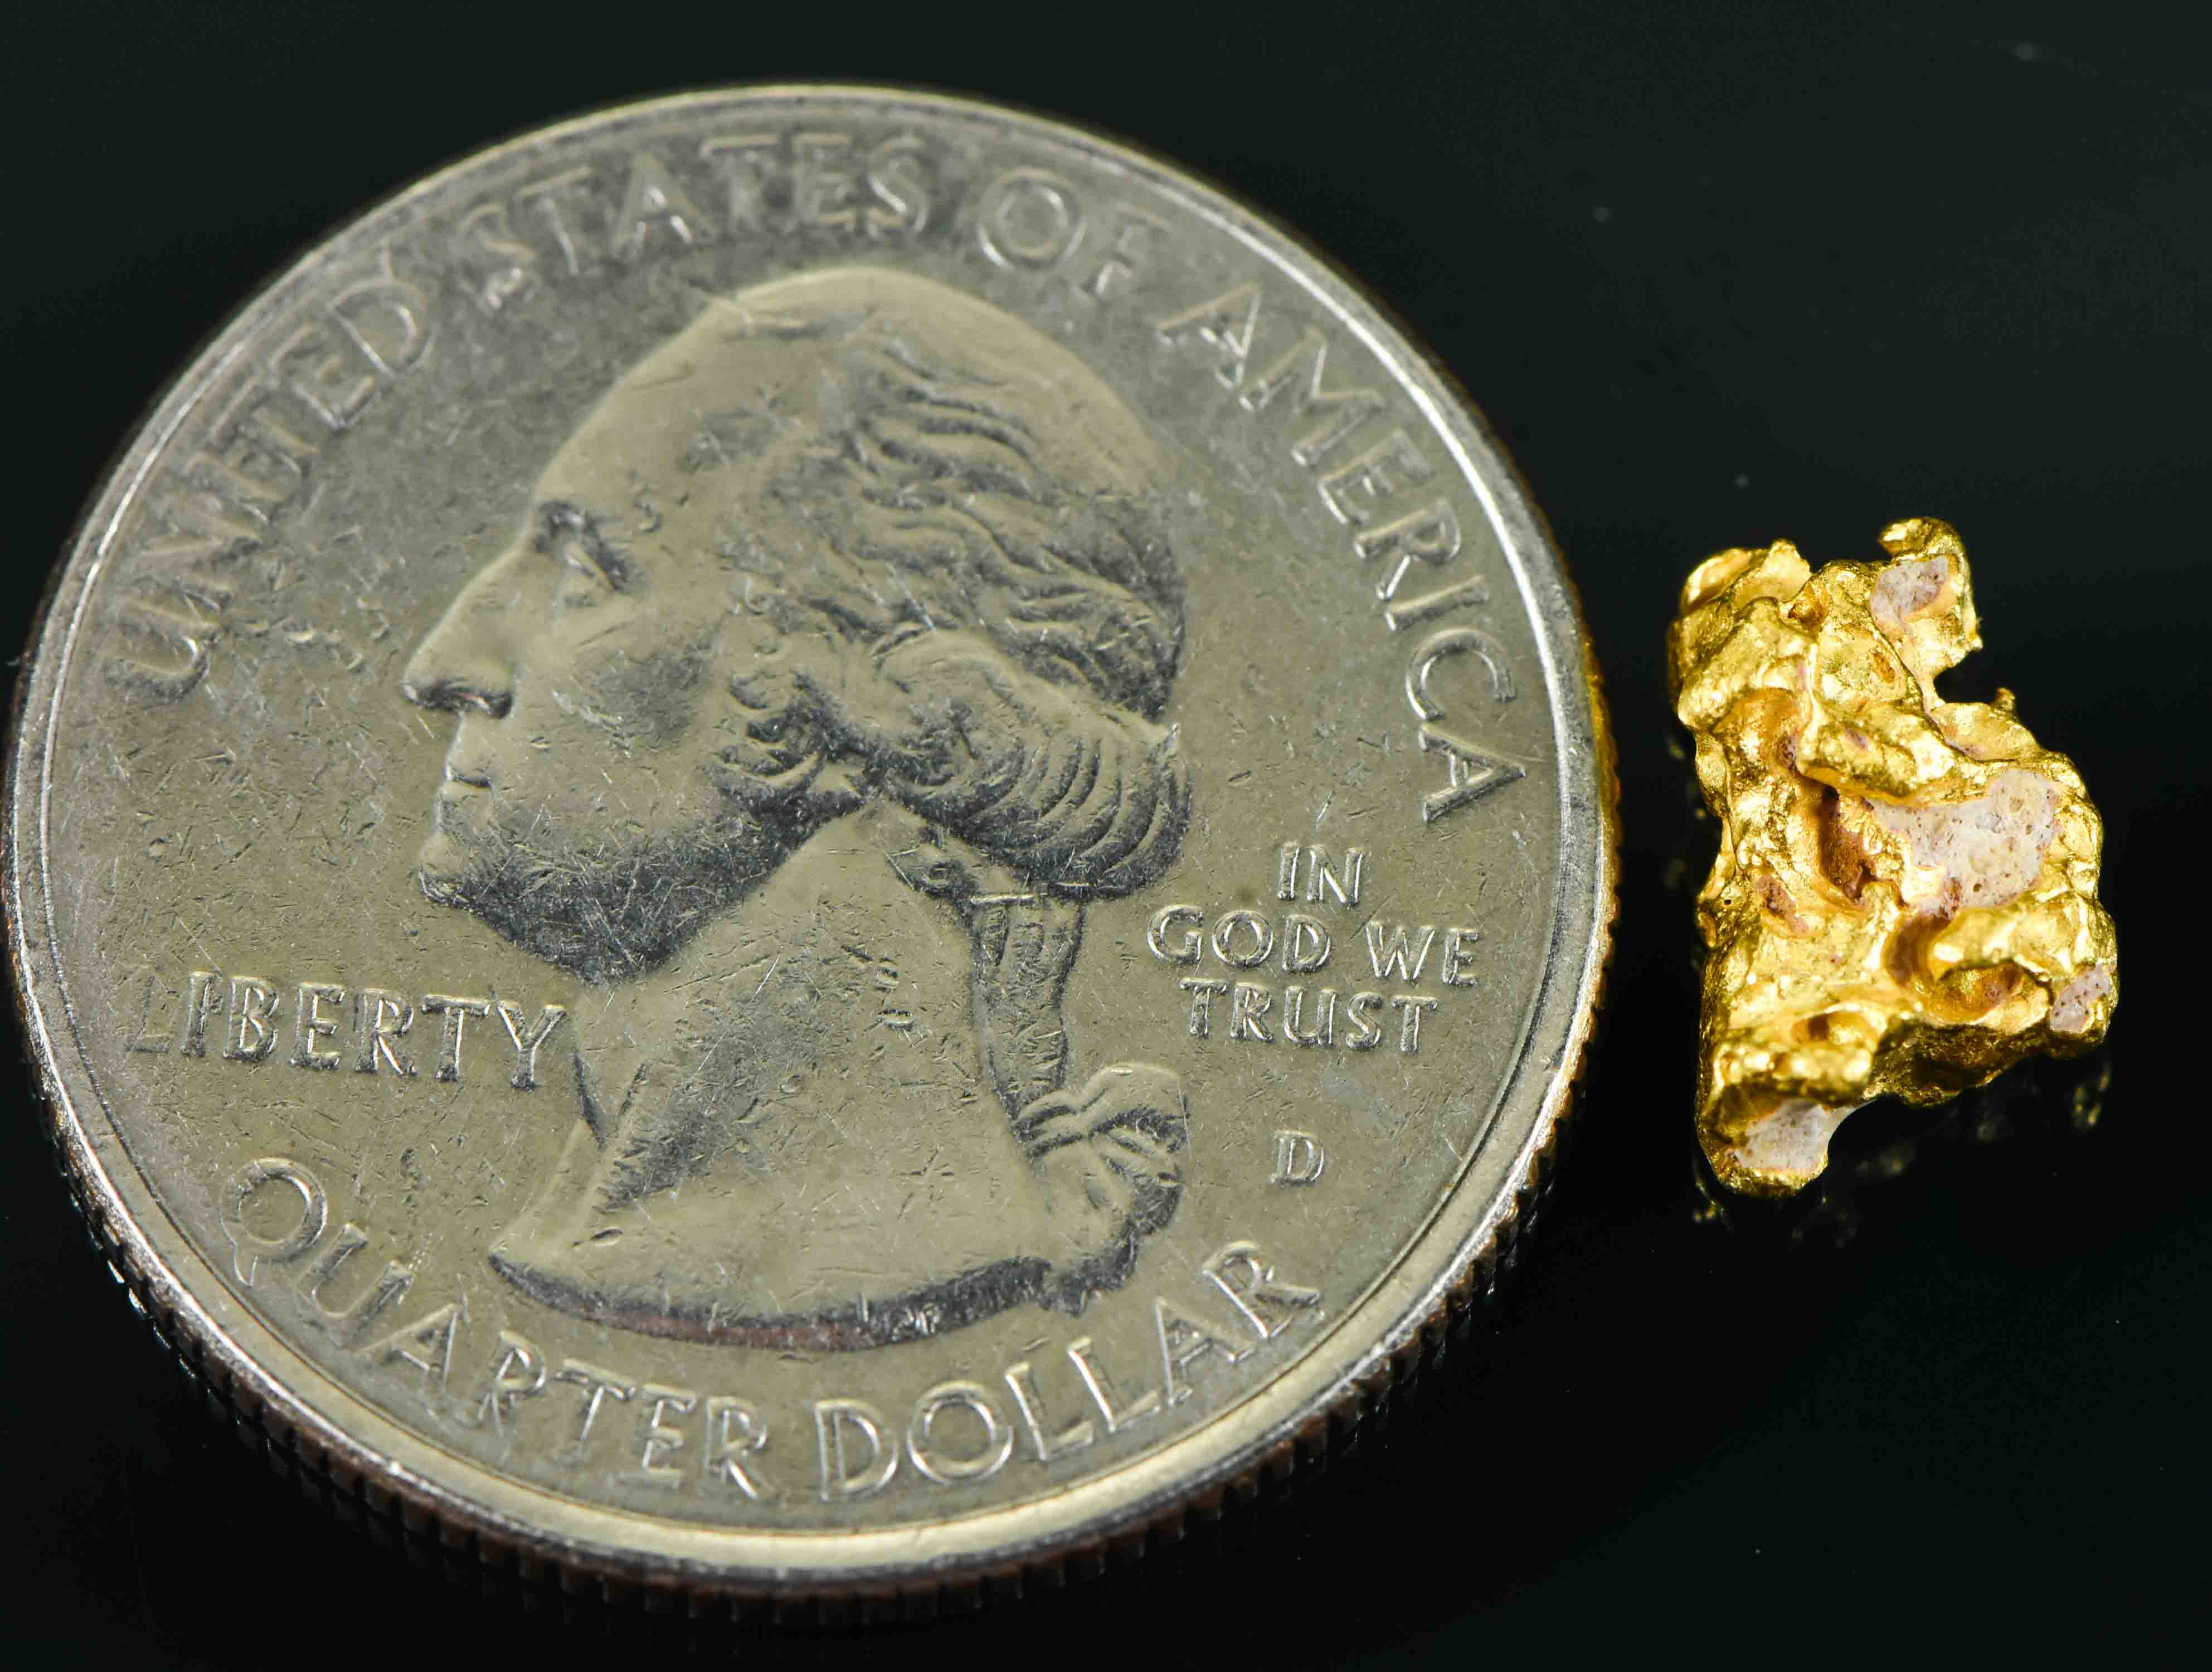 #5 Australian Natural Gold Nugget With Quartz Weighs 1.37 Grams.